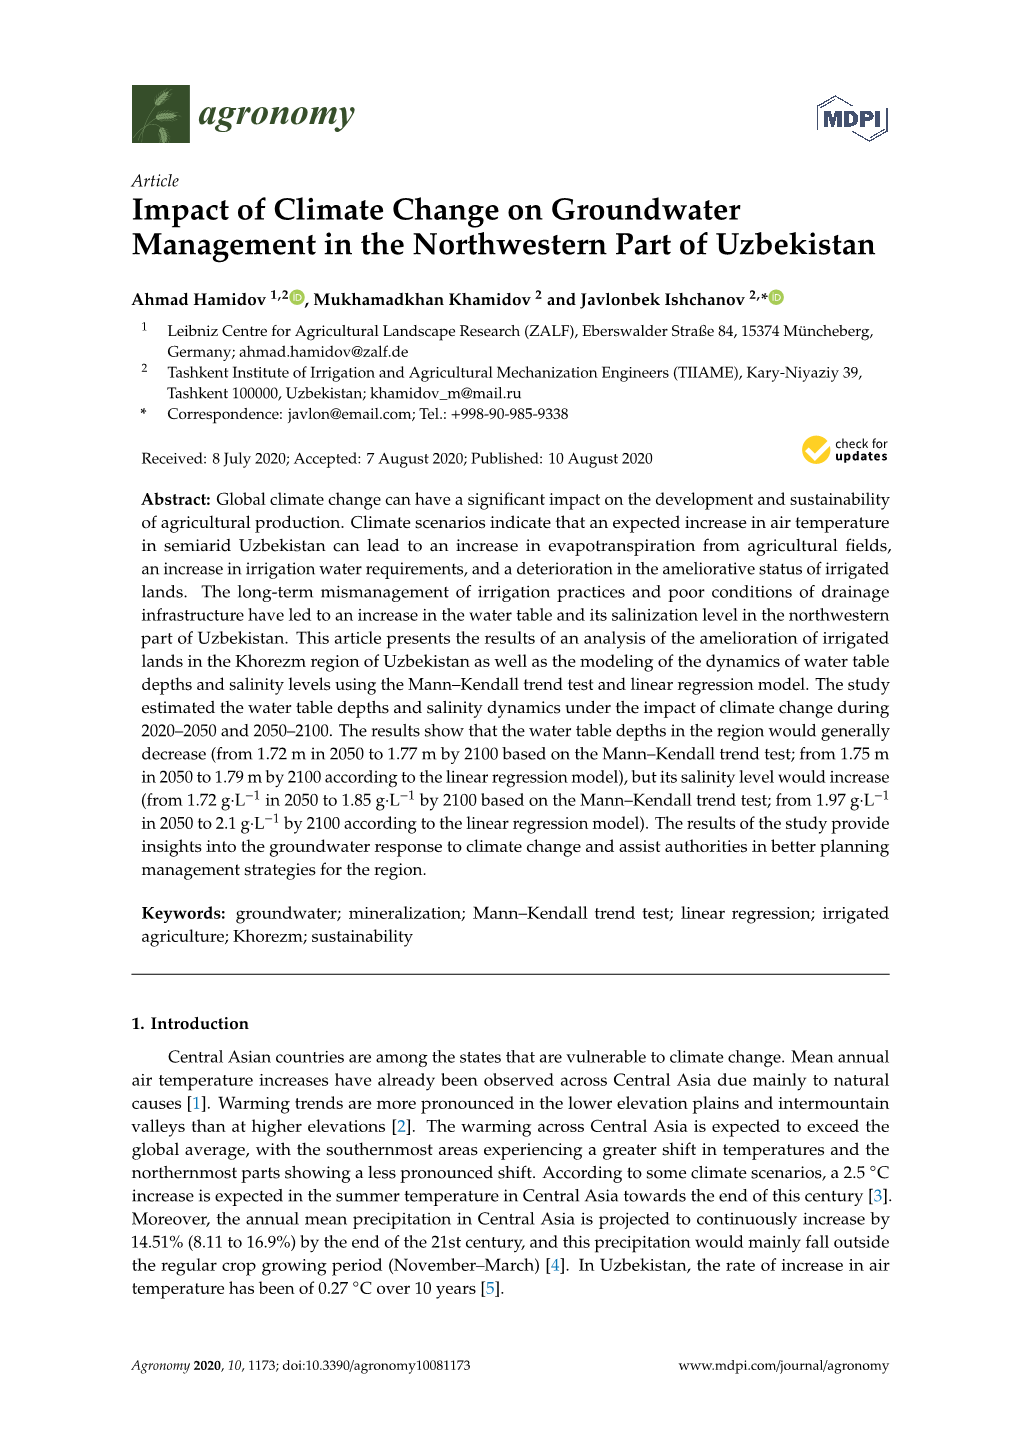 Impact of Climate Change on Groundwater Management in the Northwestern Part of Uzbekistan